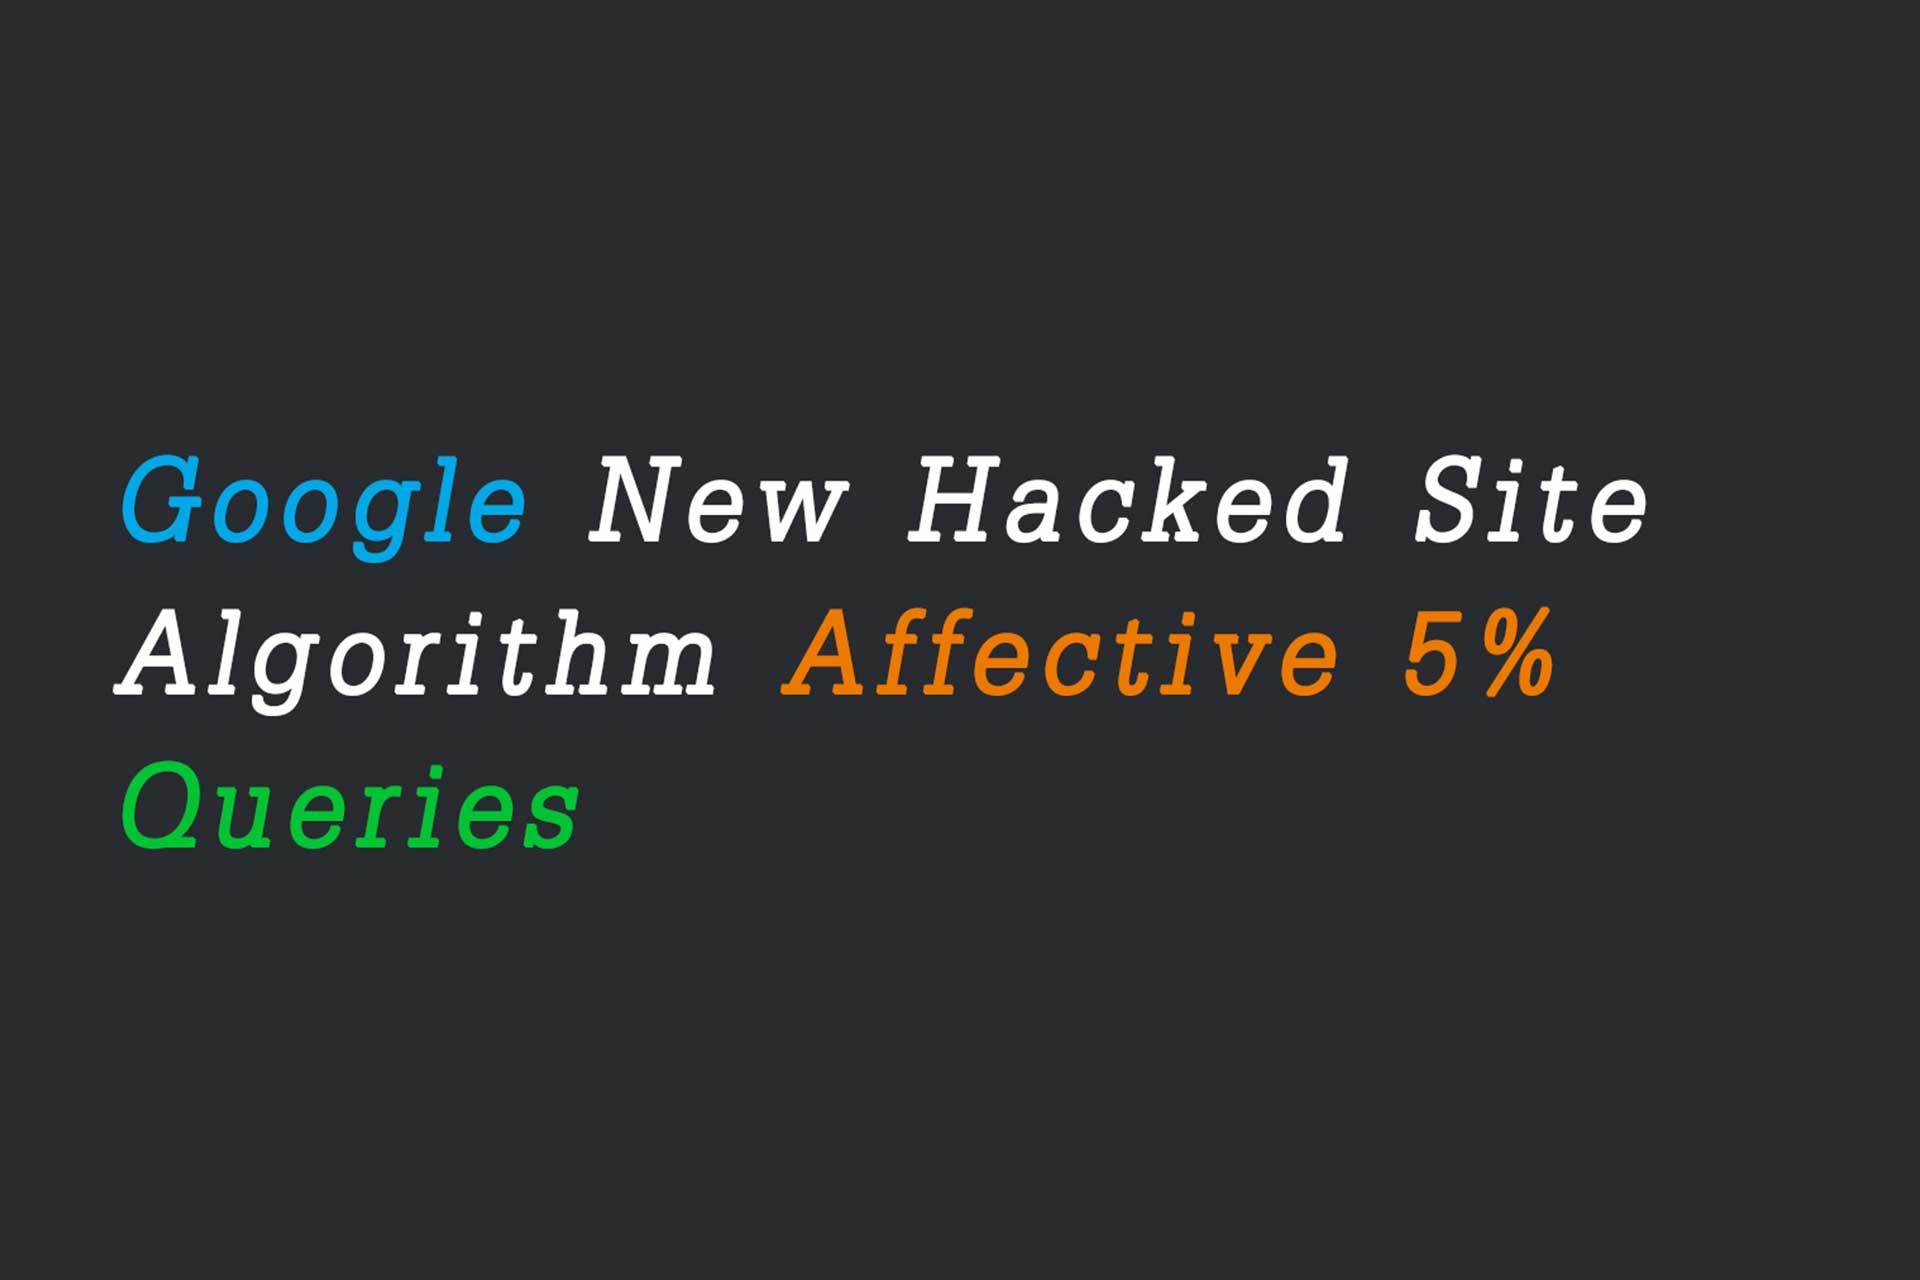 Google New Hacked Site Algorithm Will Affect 5% Of Search Queries.